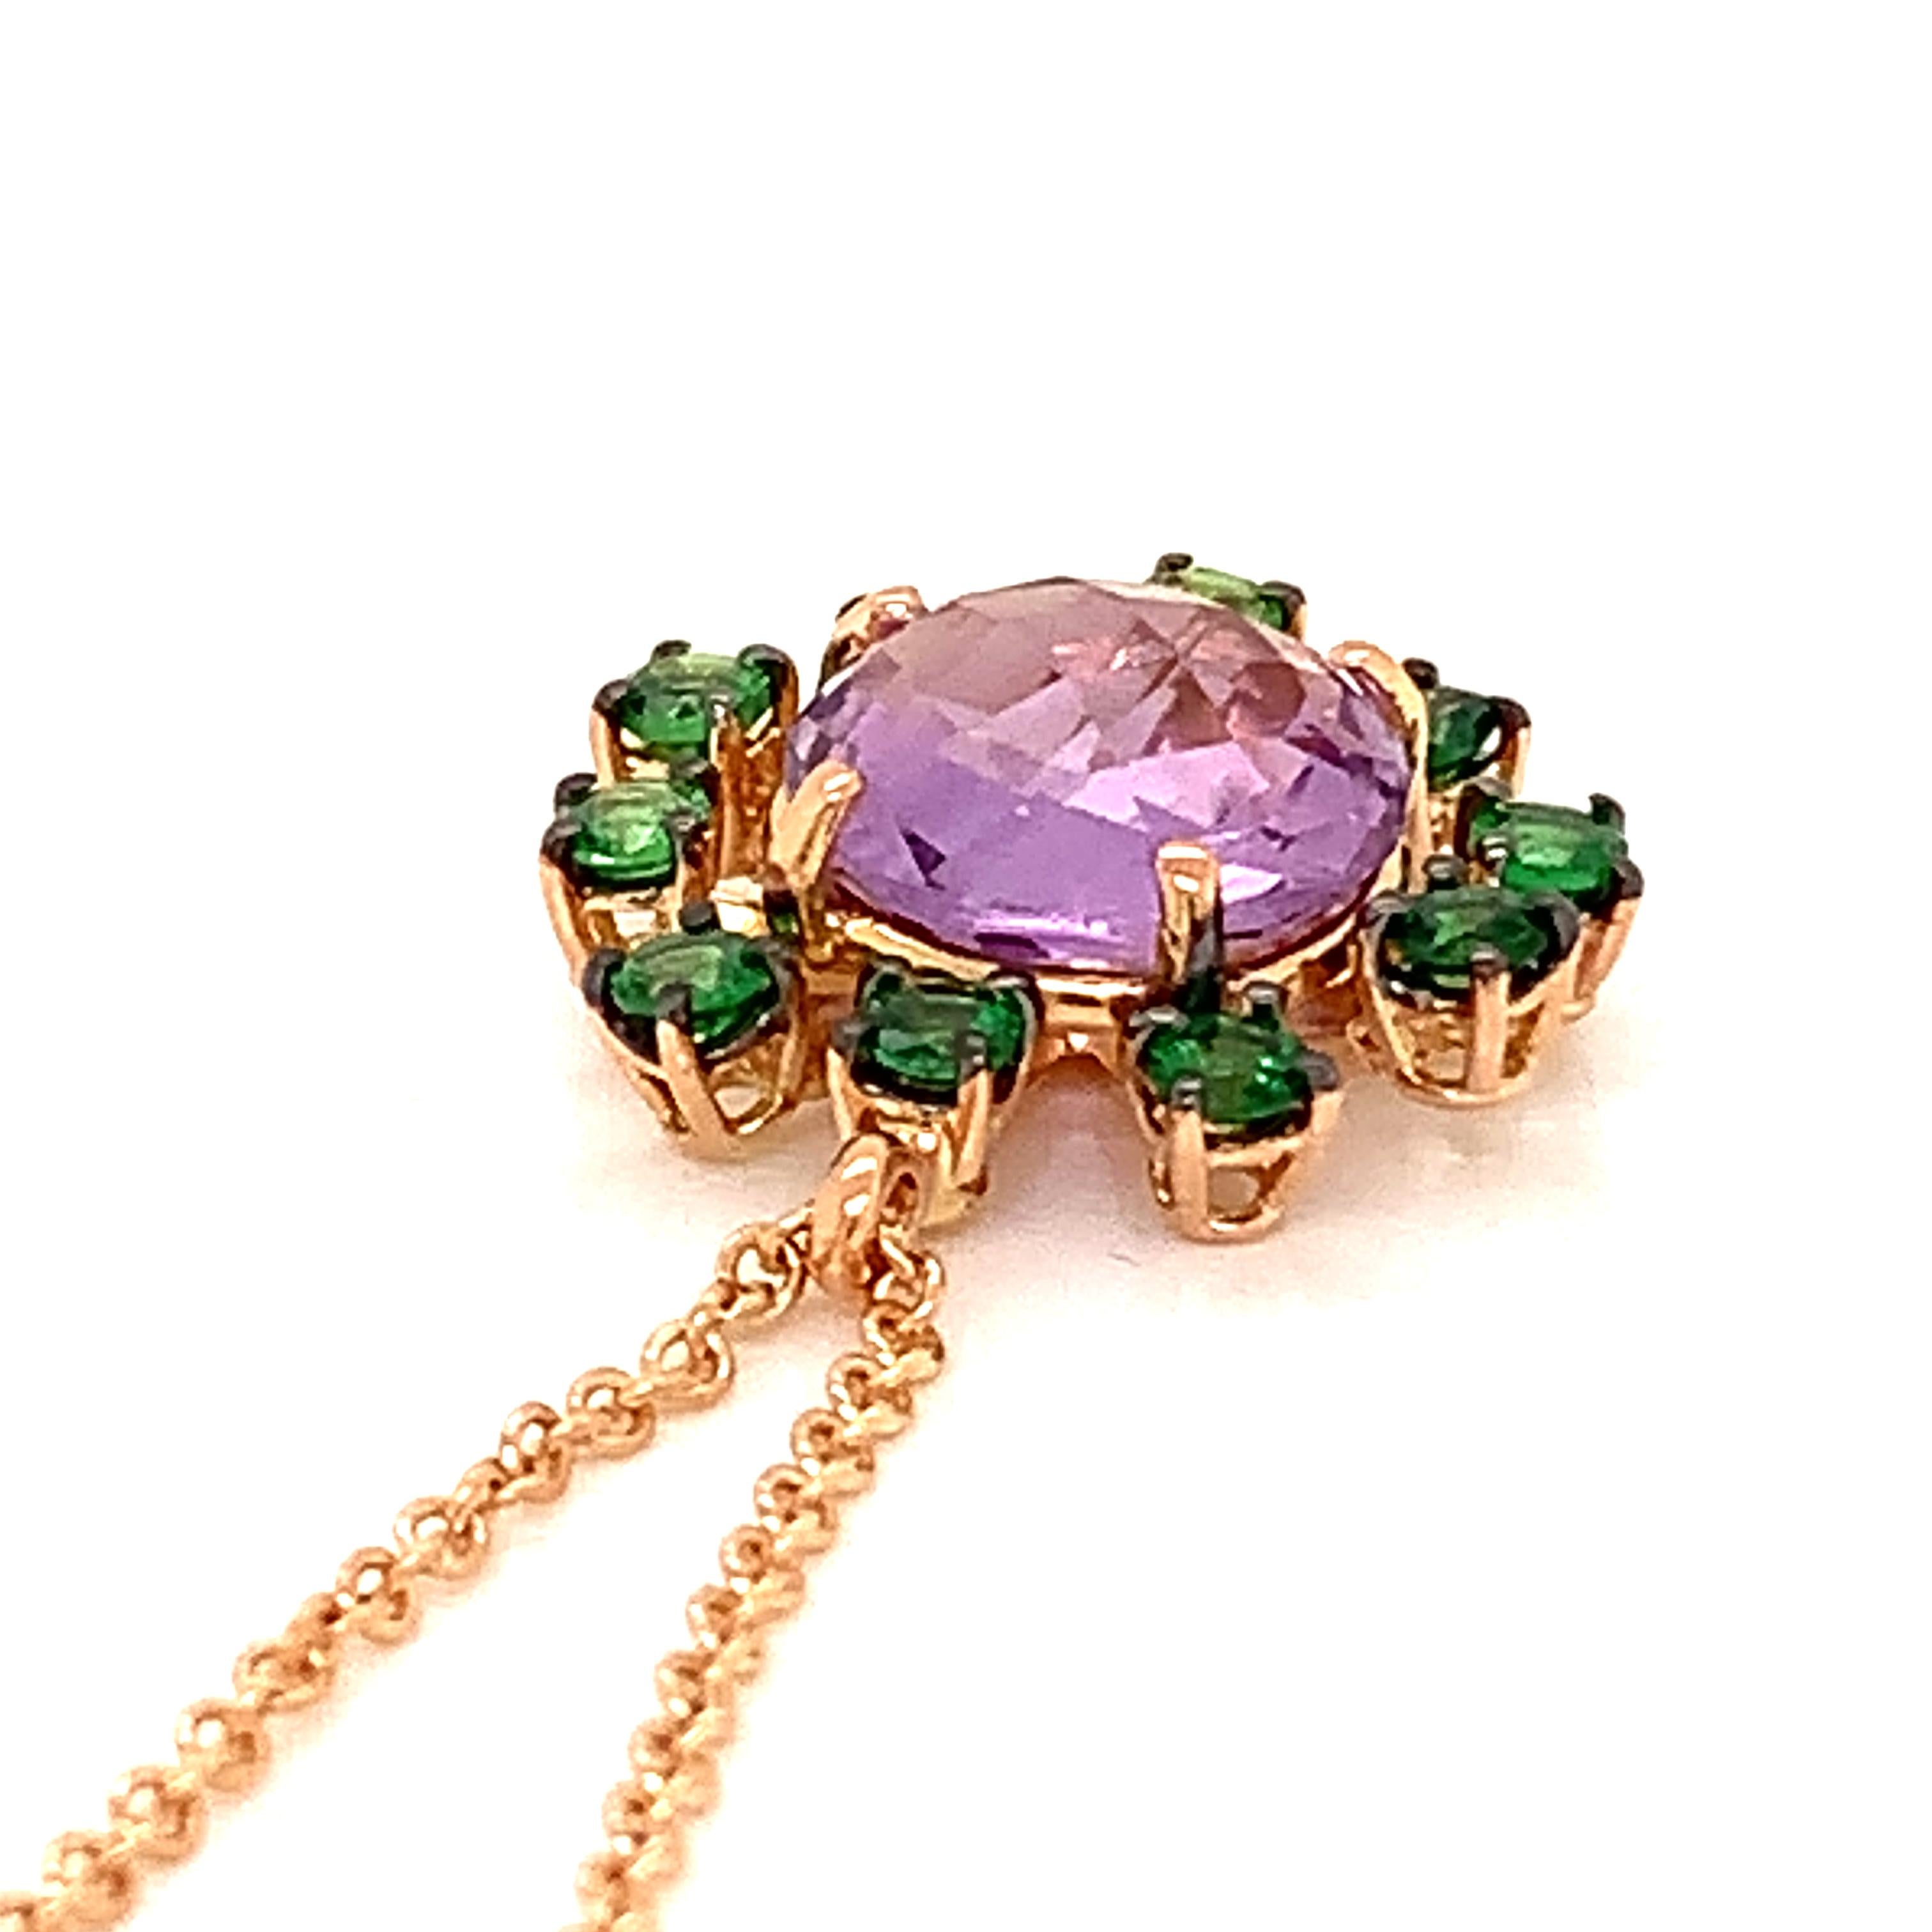 Contemporary 18 Karat Rose Gold Amethyst and Tzavorite Garavelli Pendant with Chain For Sale